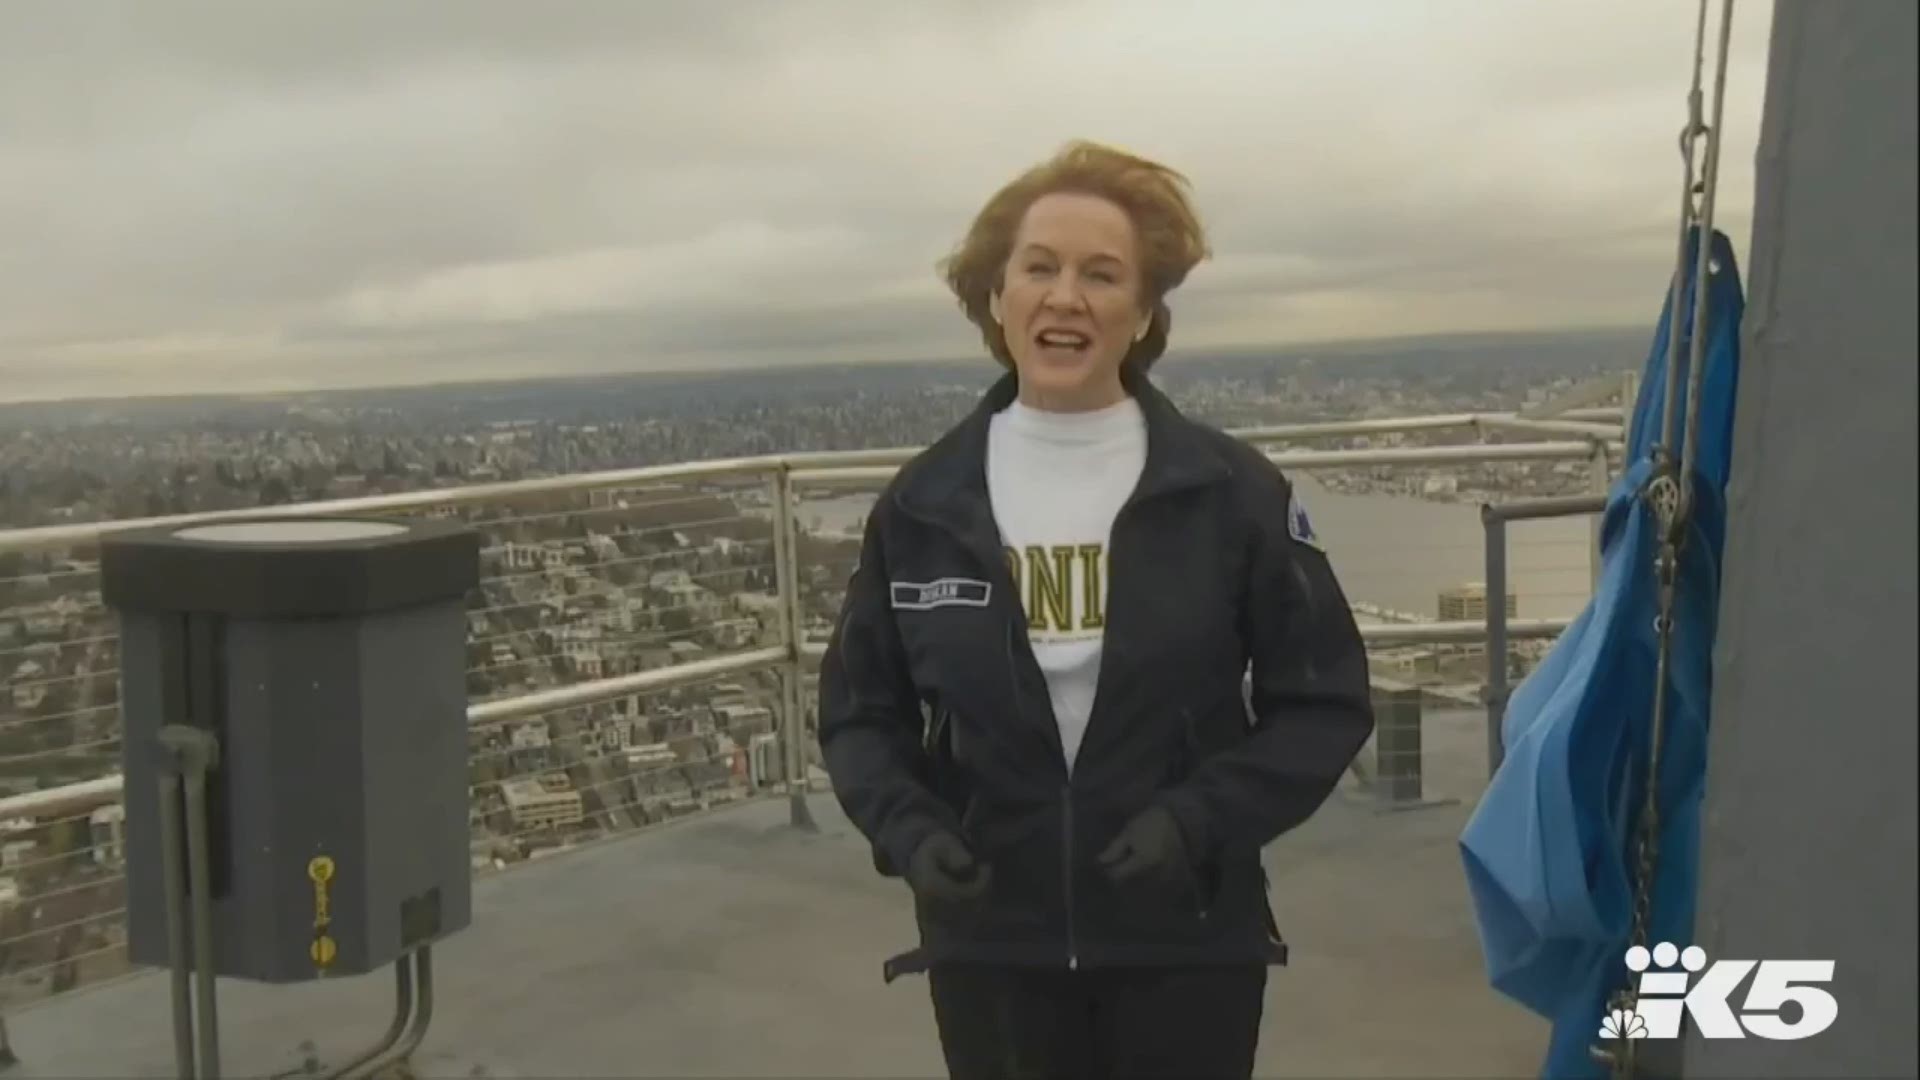 Mayor Jenny Durkan raised a flag that says "We got this Seattle" atop the Space Needle Thursday.